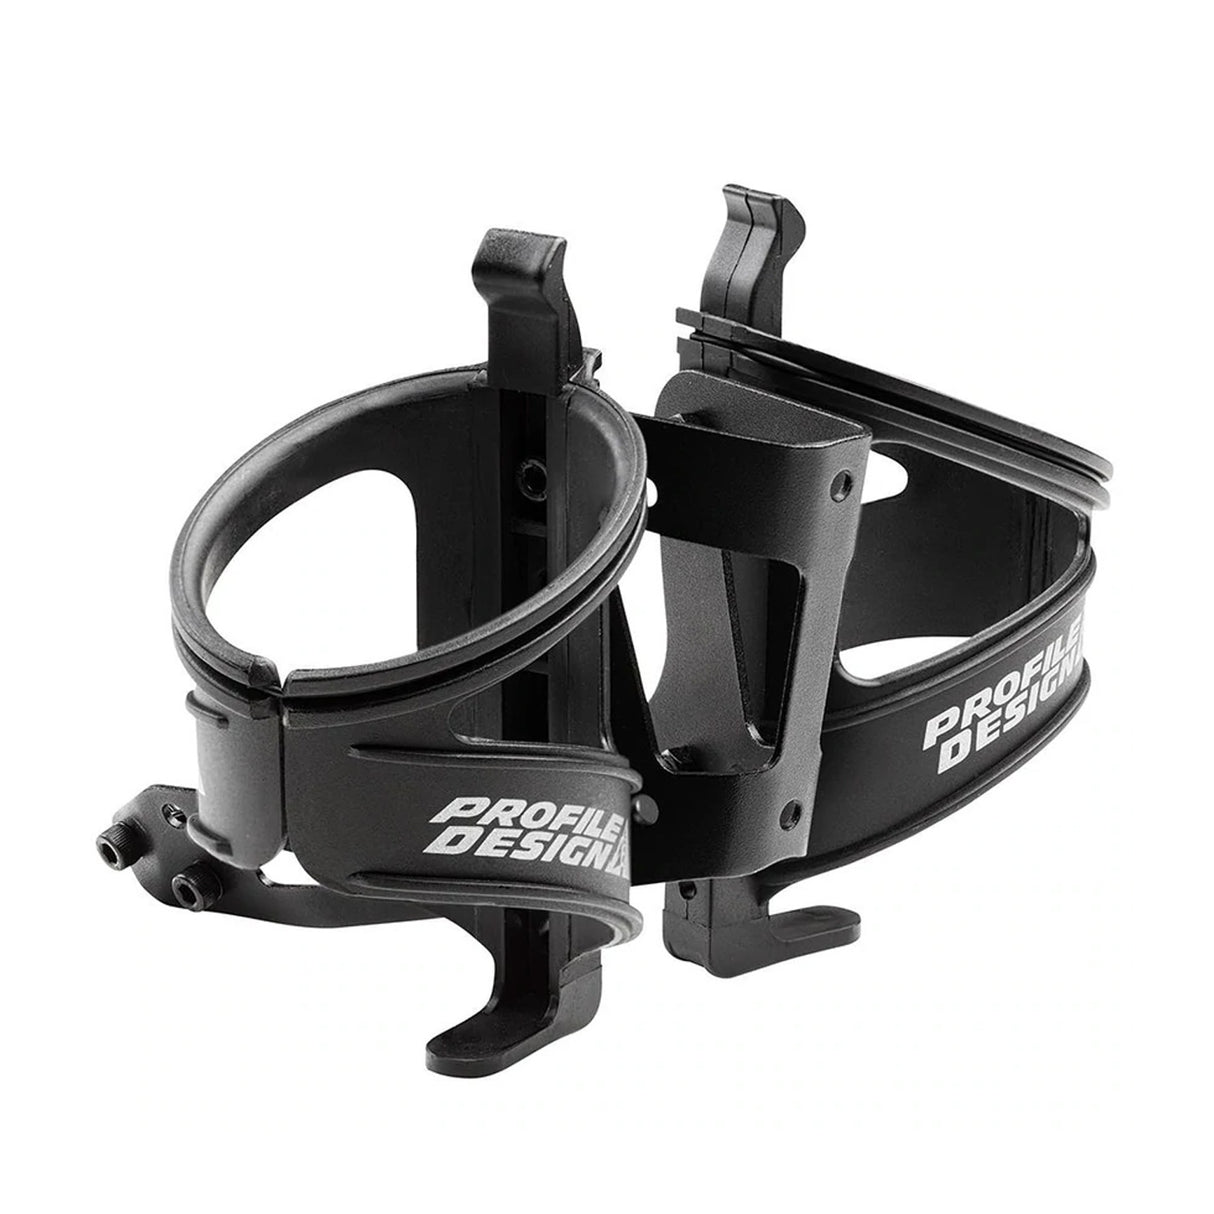 Profile Design RML Hydration Cage Rear System with Mount